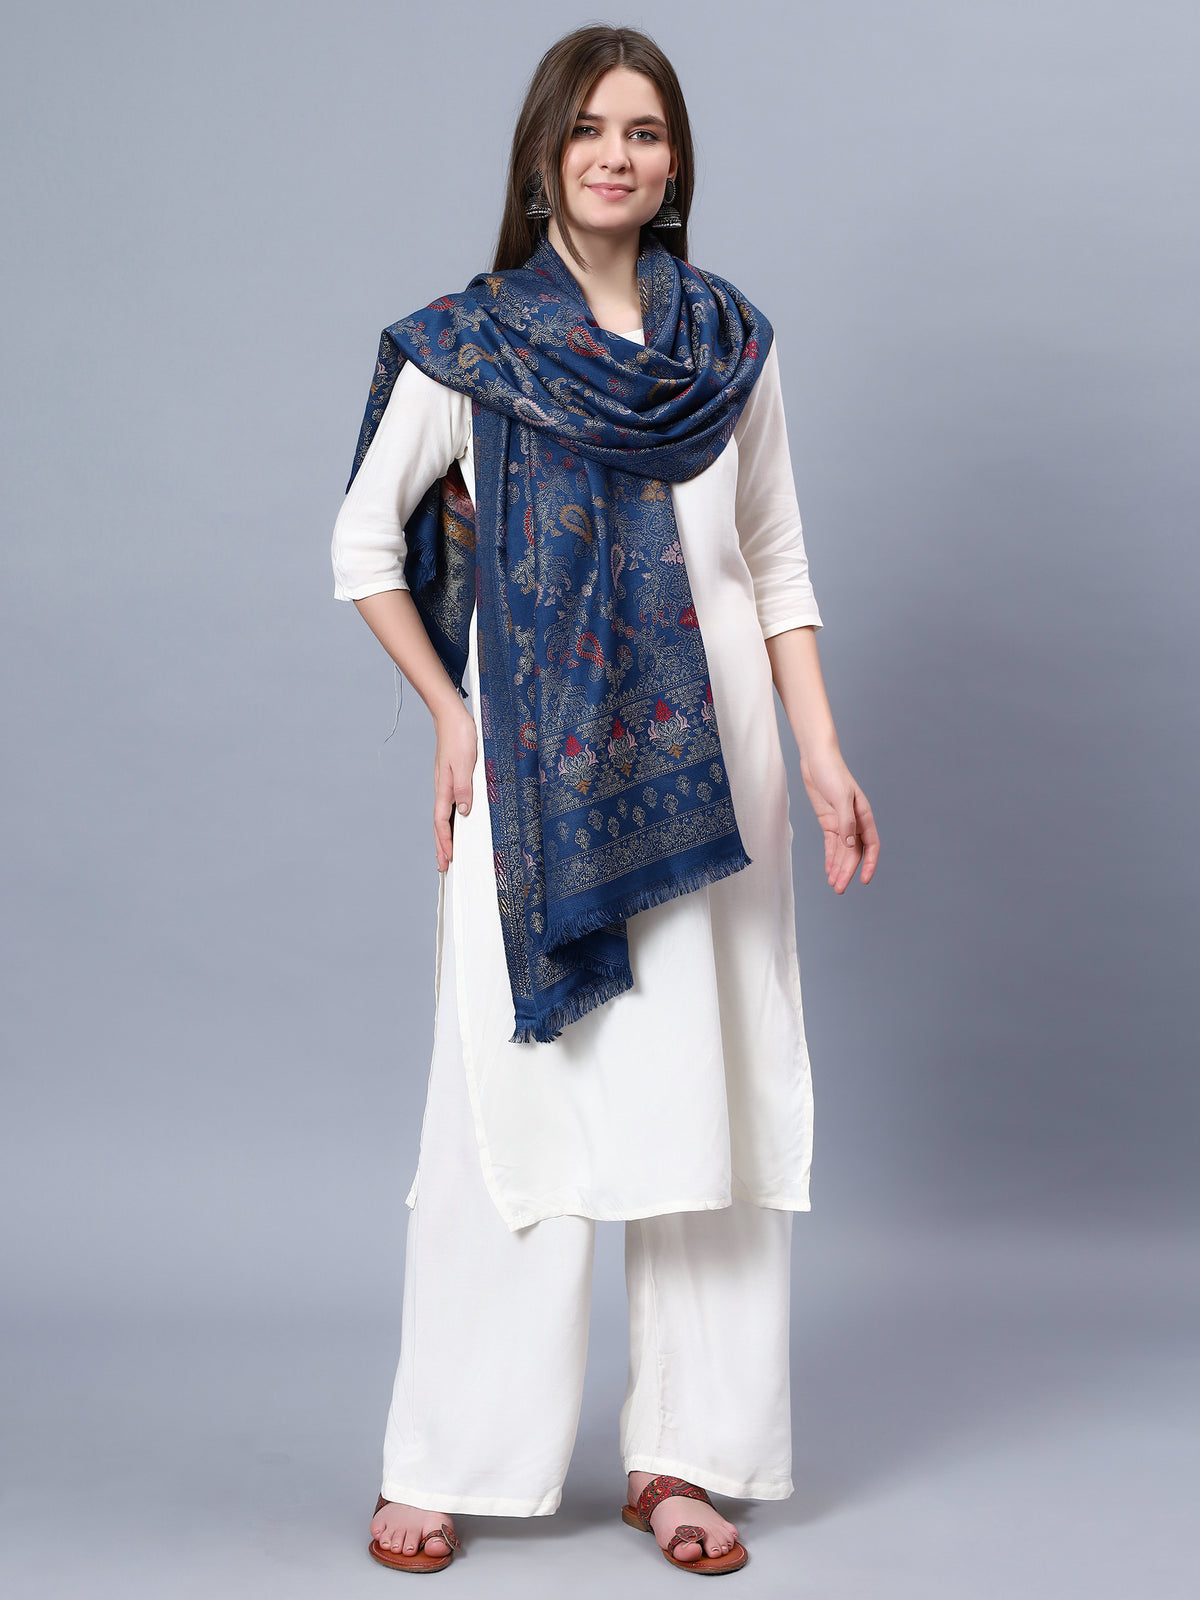 Multicolor viscose stole with paisely and floral jacquard pattern